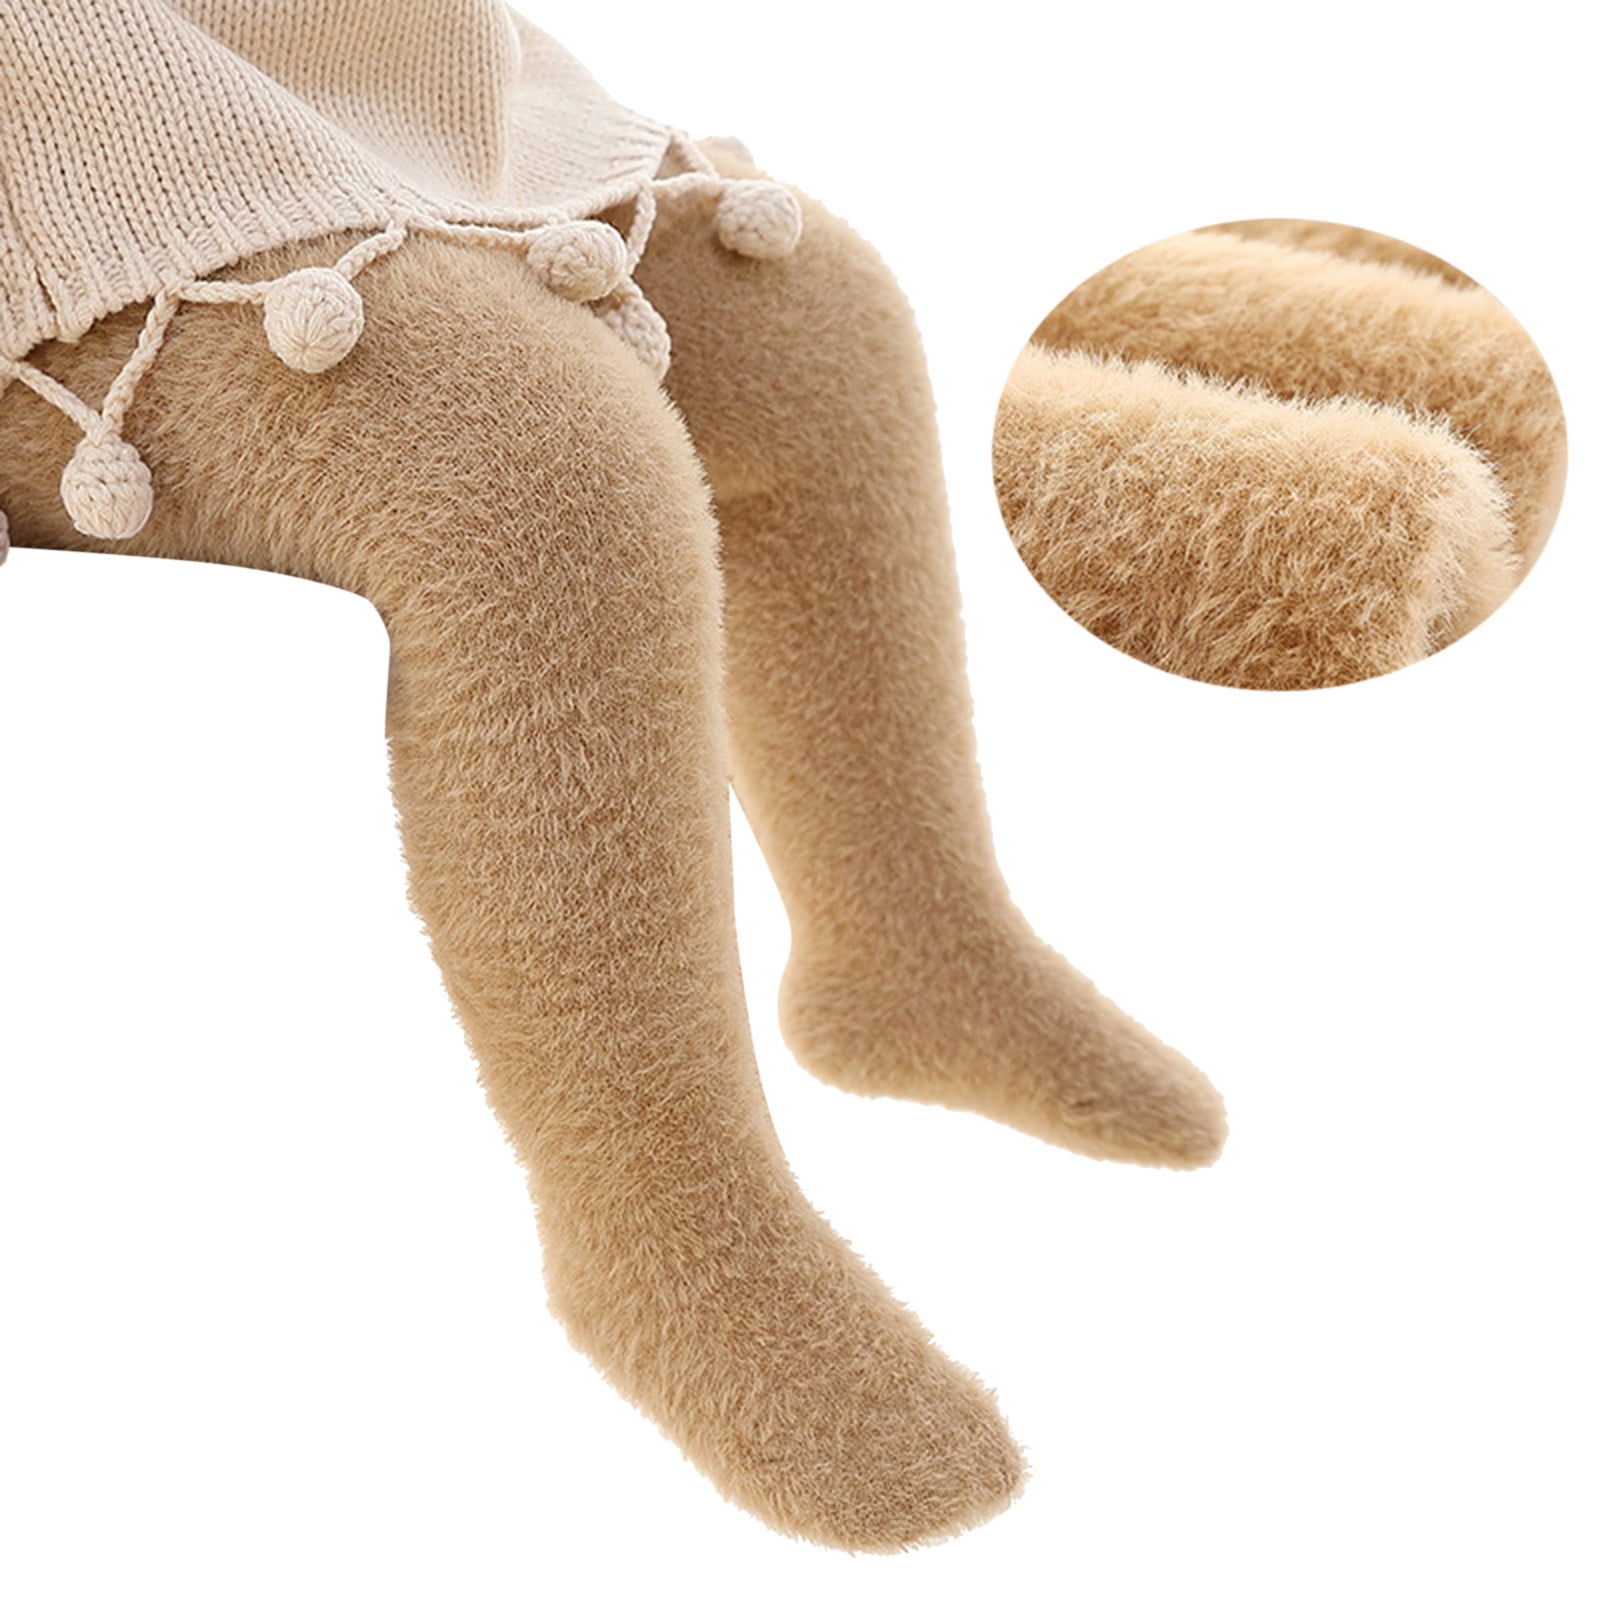  Infant Kids Solid Color Tights Winter Fleece Lined Pantyhose  Thick Warm Stretchy Footed Leggings for Girls (Beige, 6-12 Months) : Sports  & Outdoors